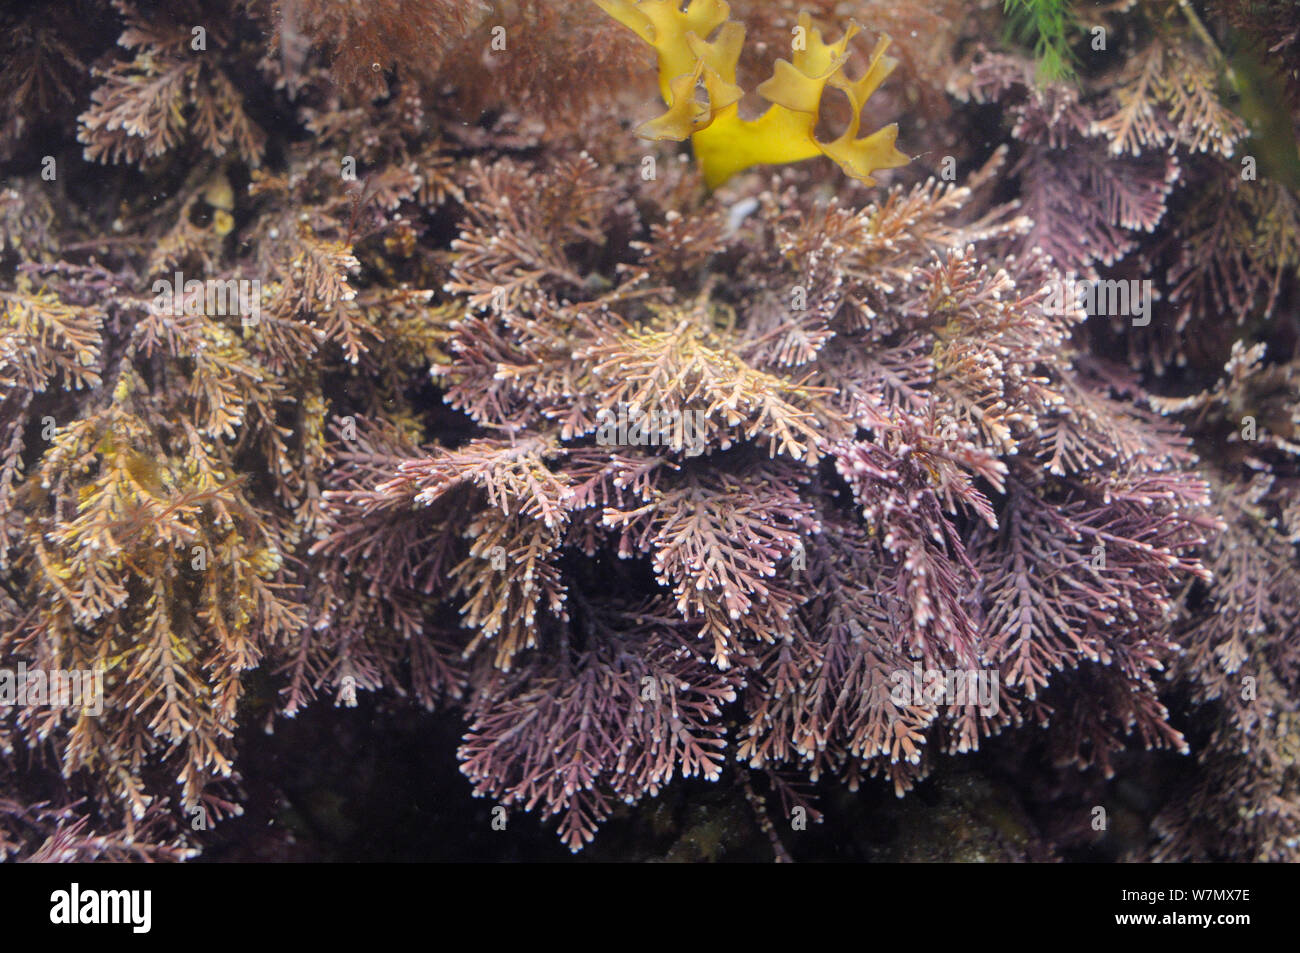 Coral weed (Corallina officinalis) growing in a rockpool, North Berwick, East Lothian, UK, July Stock Photo